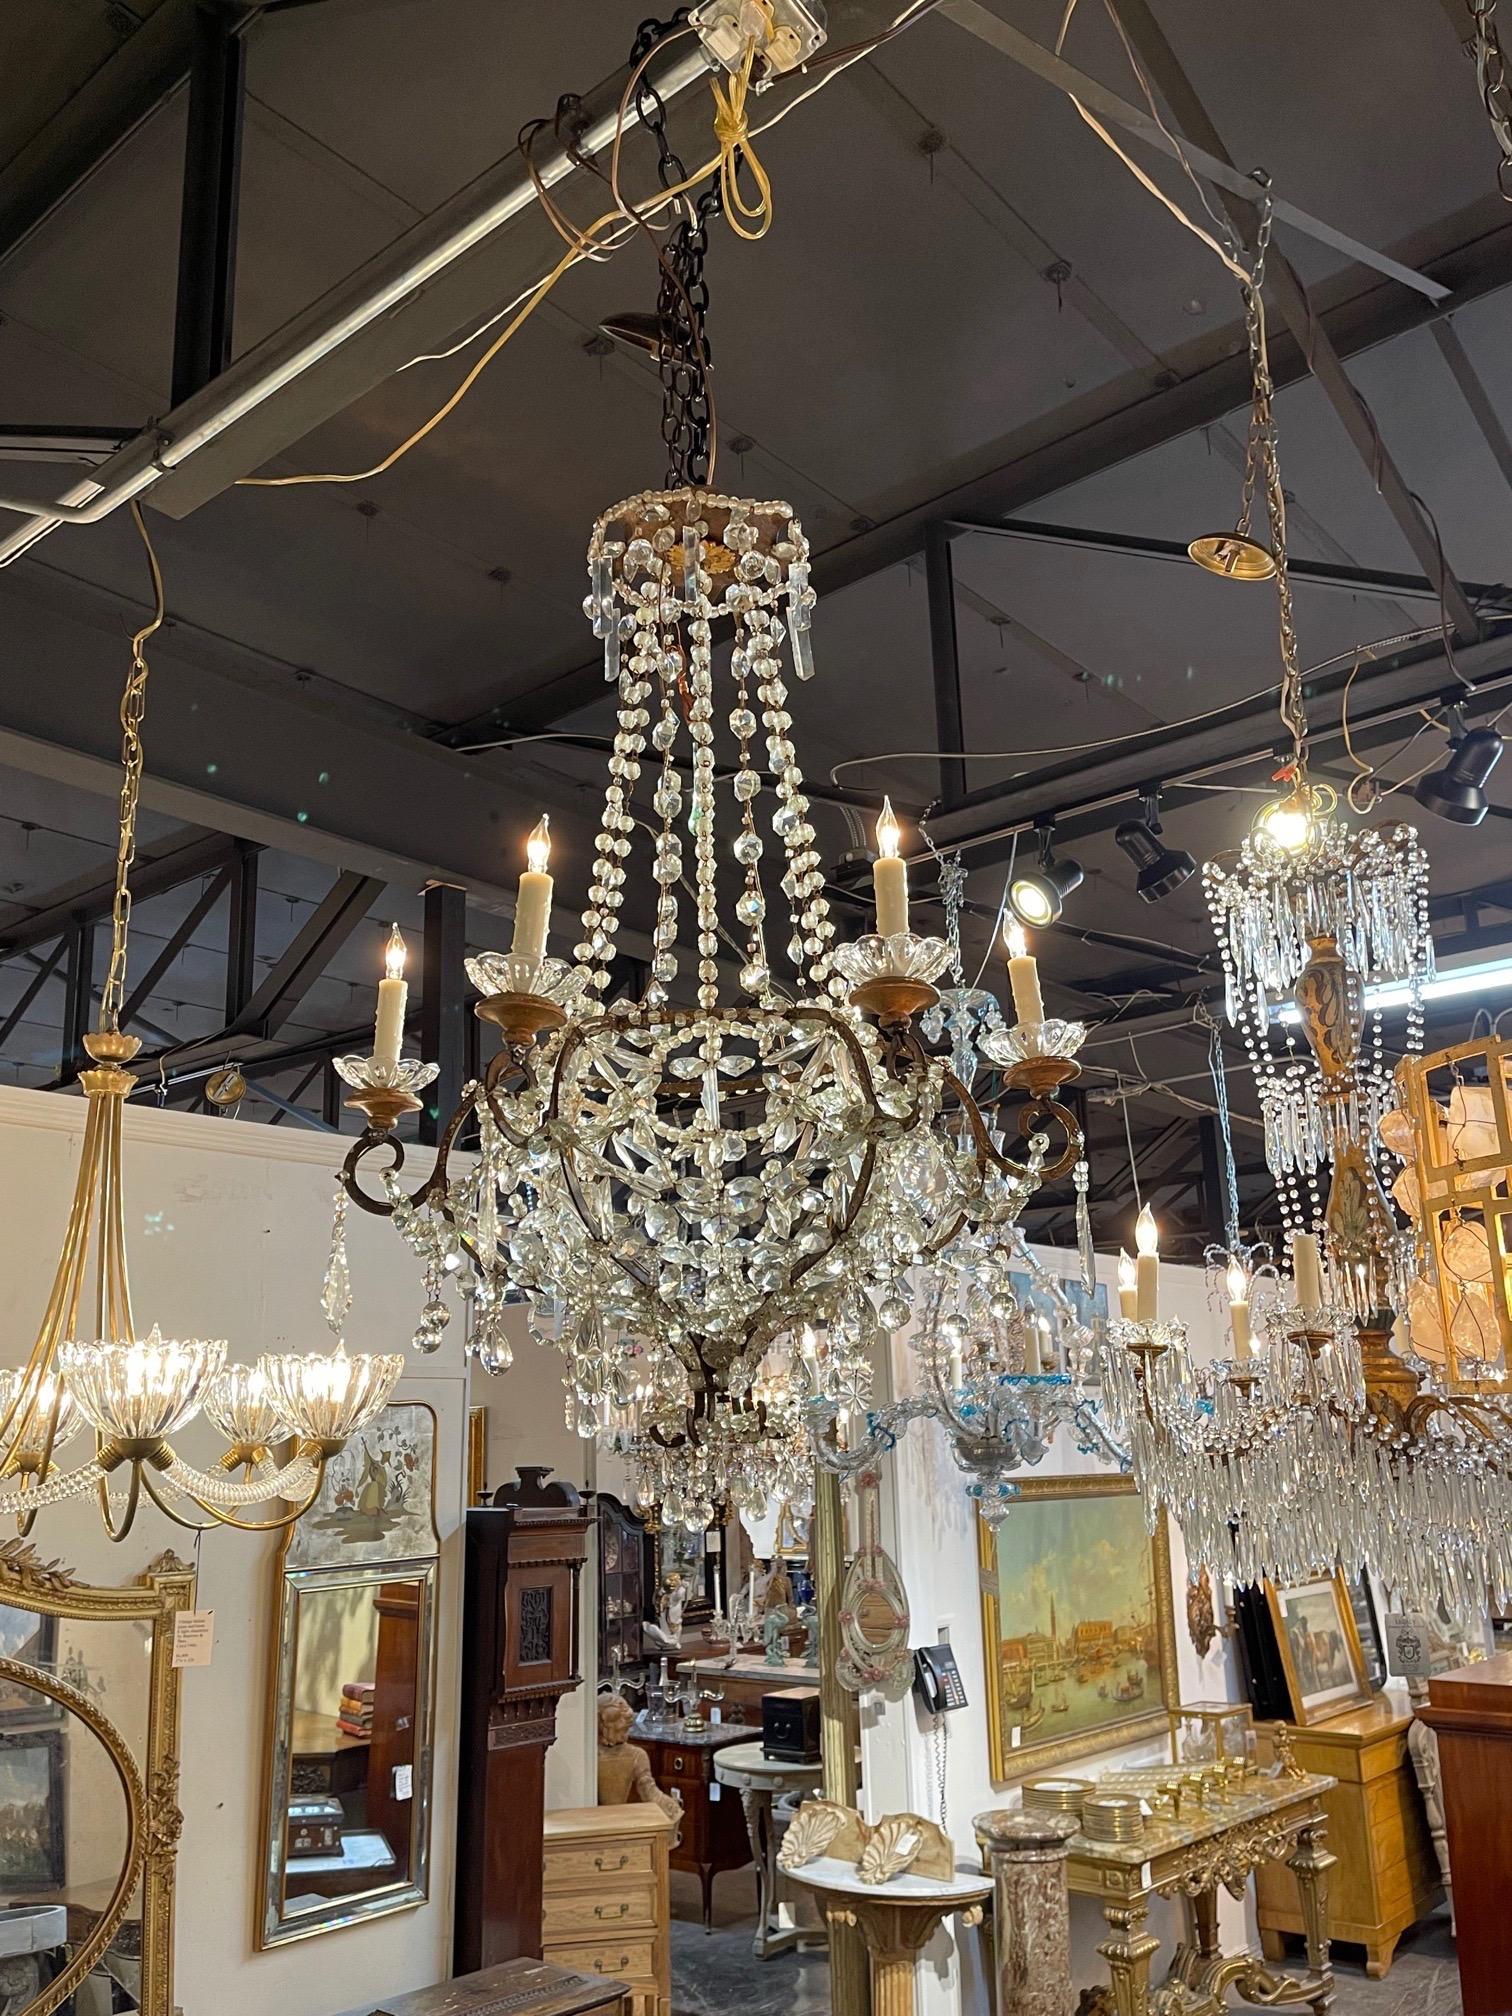 Very nice 18th century Italian glass and crystal basket form chandelier. A shimmering beauty with a great scale and shape. So pretty!